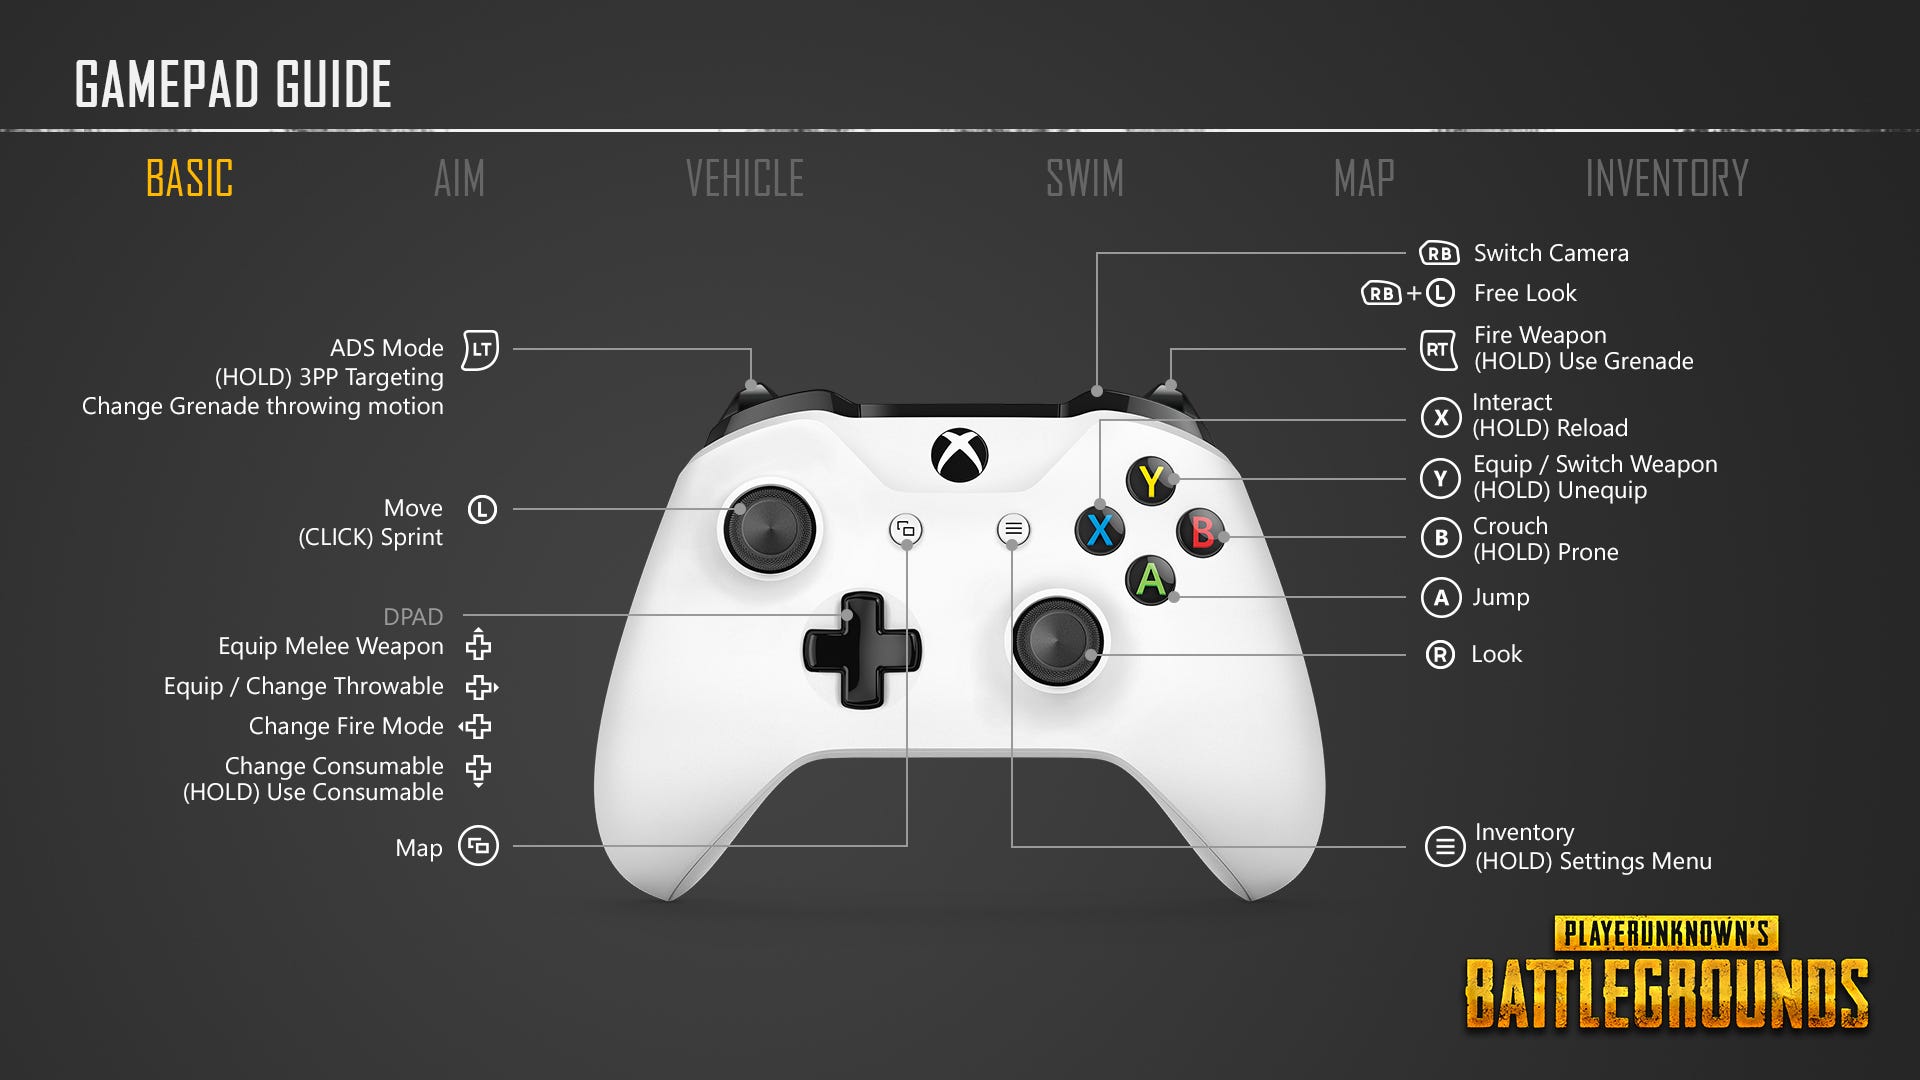 pop bijeenkomst Darmen PUBG: this is how the control setup is going to work on Xbox One | VG247